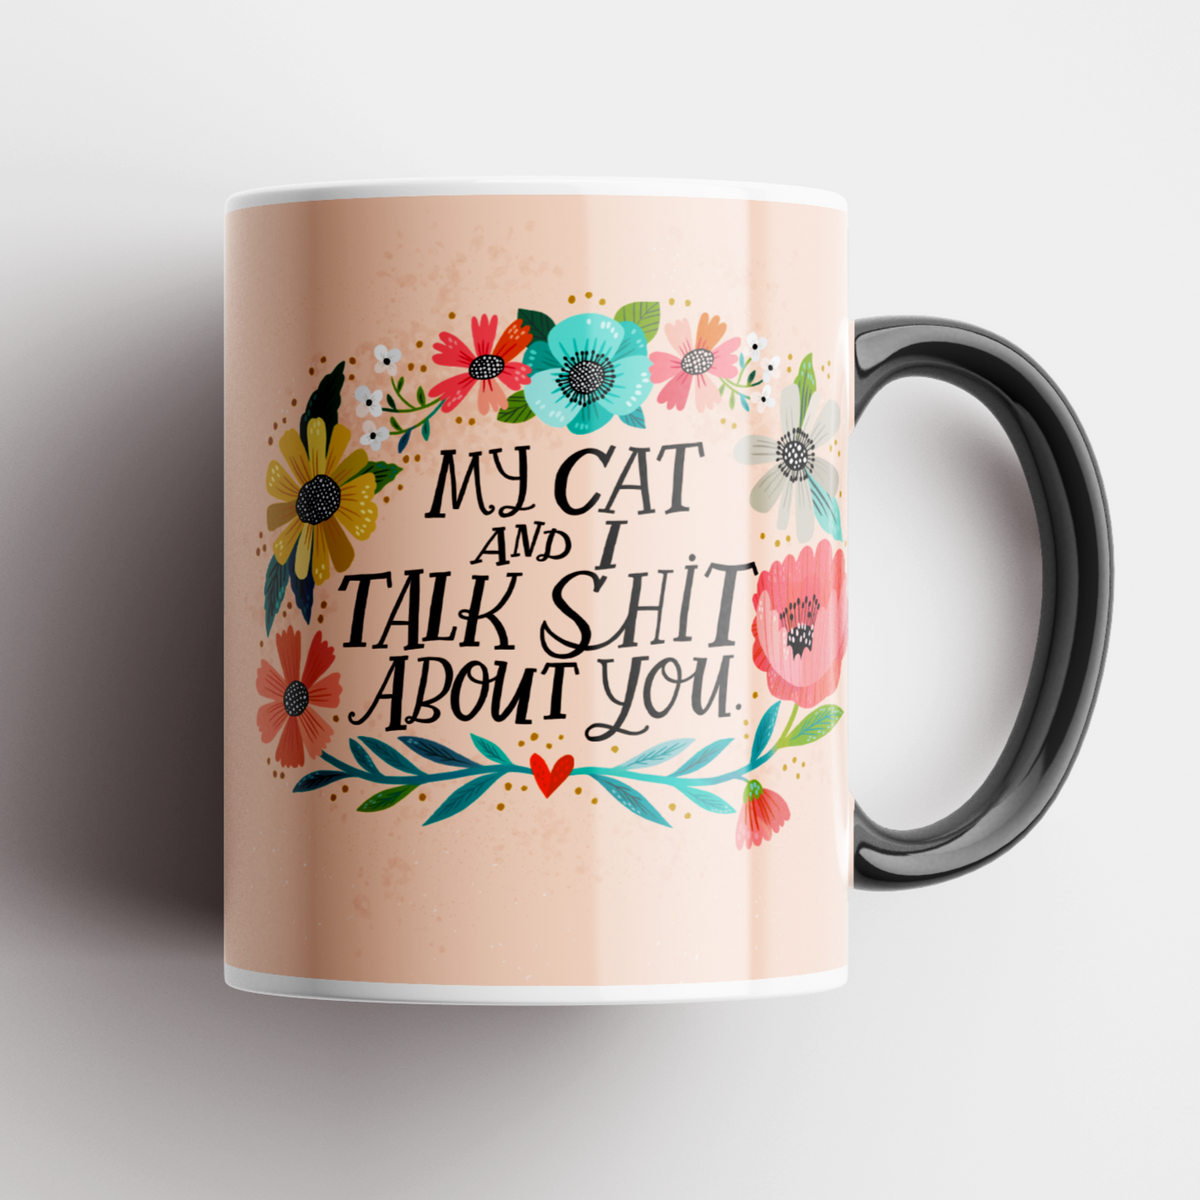 My Cat and I Talk Shit About You Mug